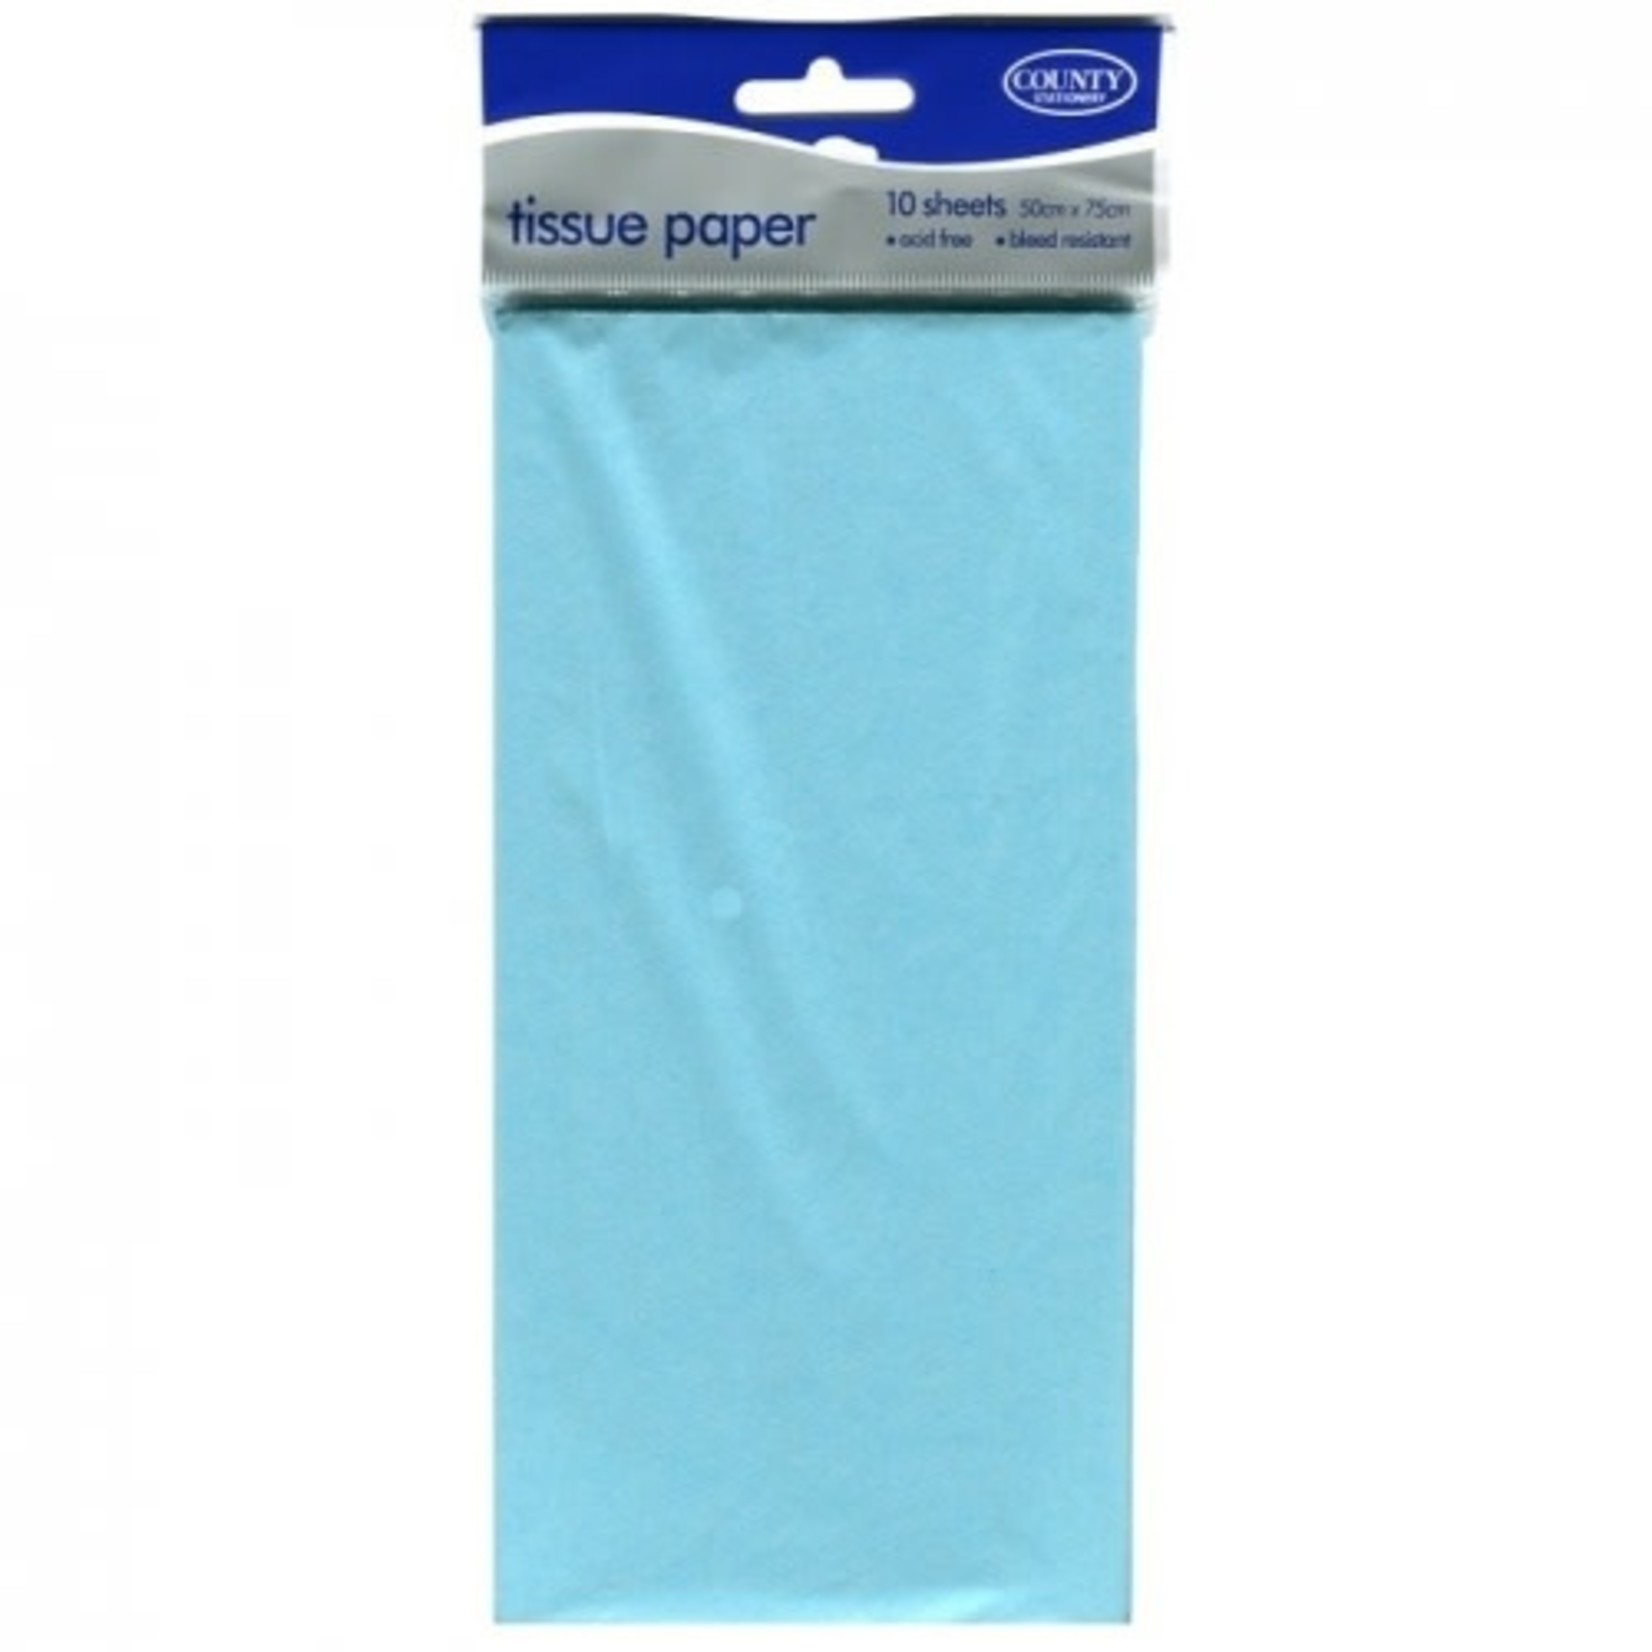 County Stationery Tissue Paper - Light Blue - 10 sheets